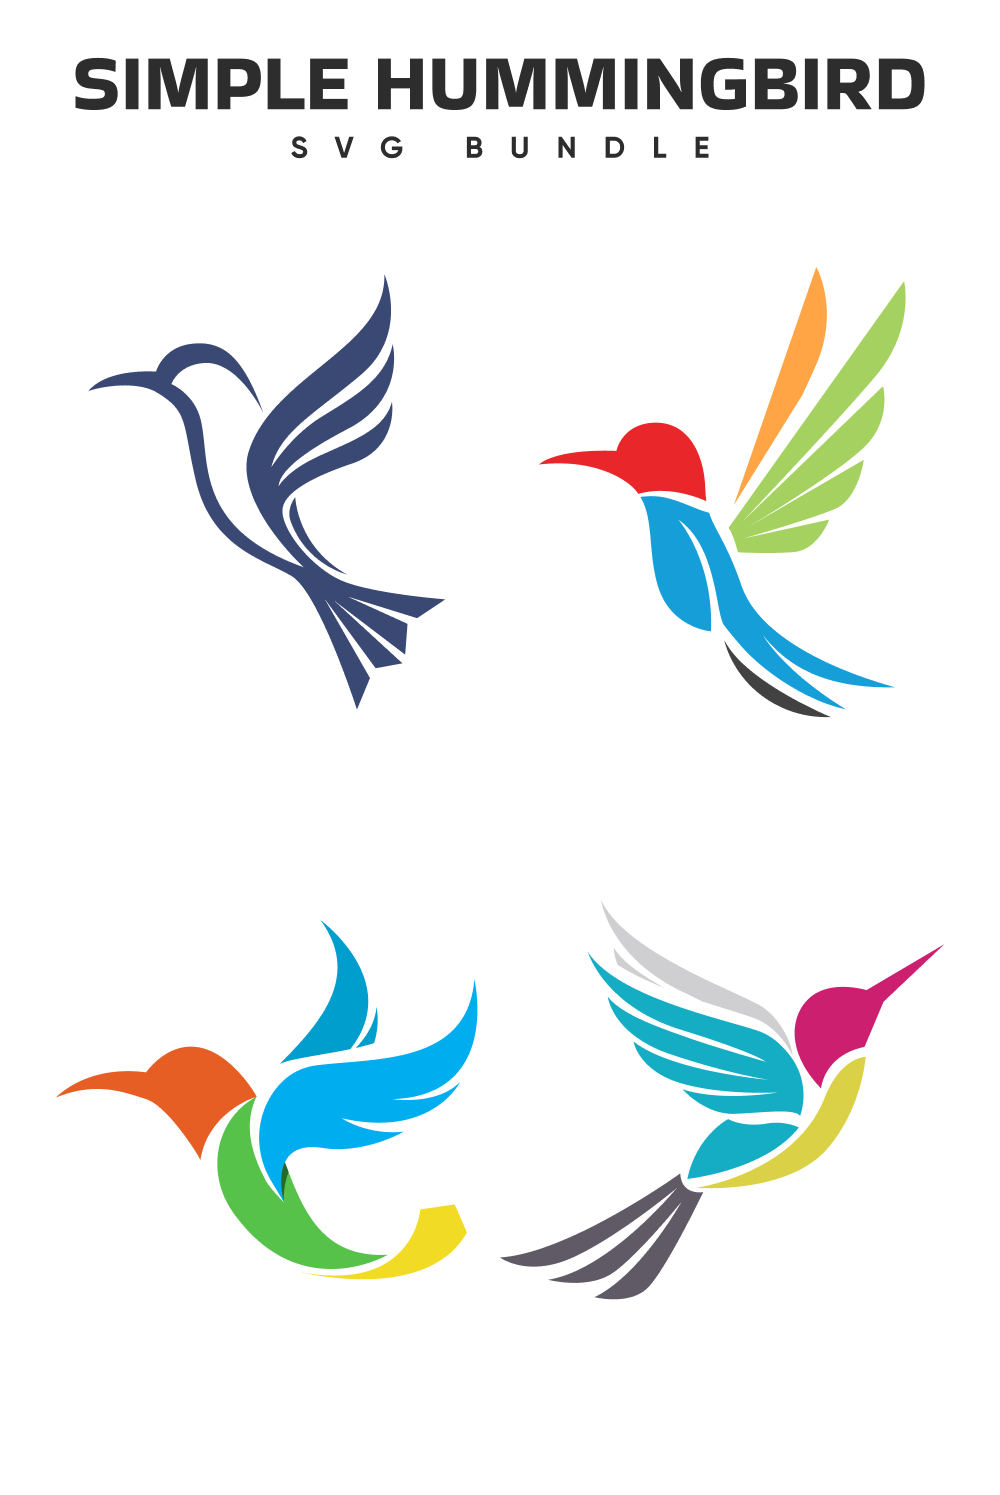 Colorful hummingbird logo is shown on a white background.